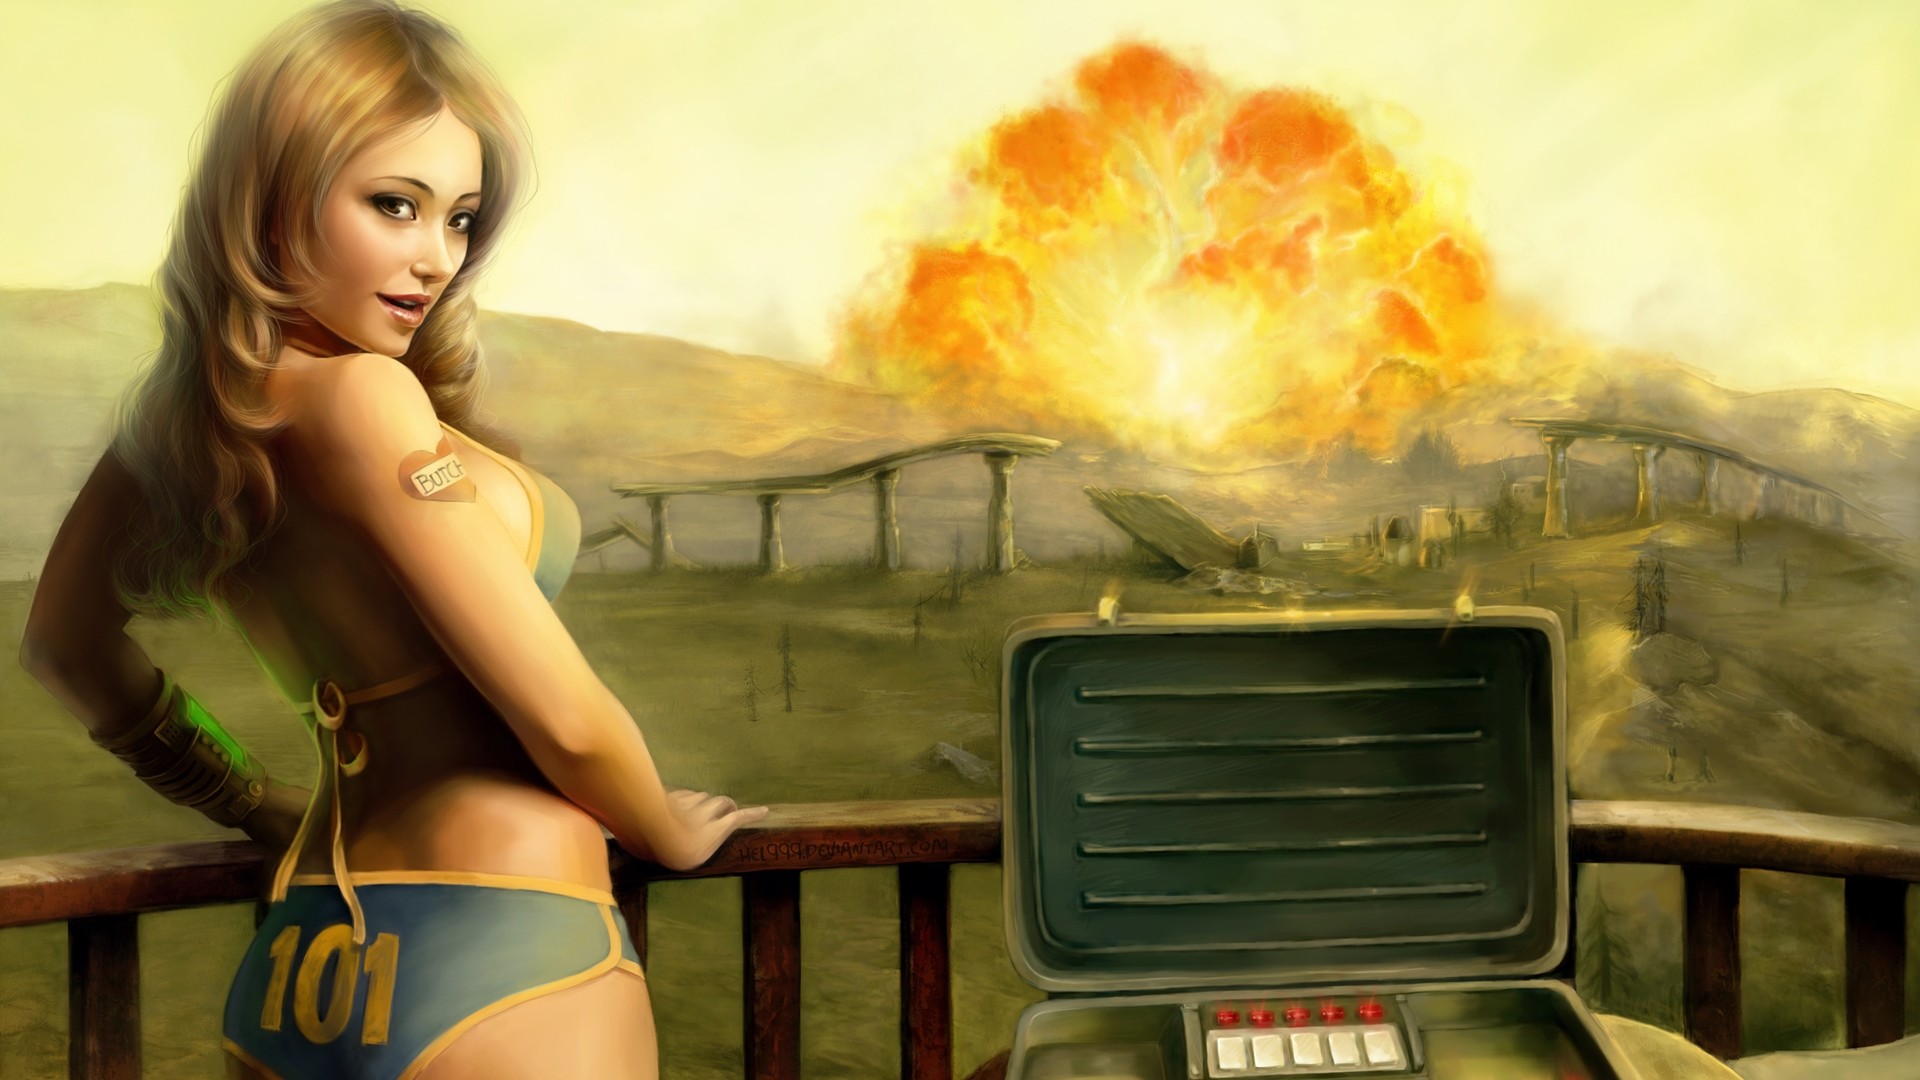 1920x1080 car wallpaper hd for iphone 5 7 | Fallout 4 ...